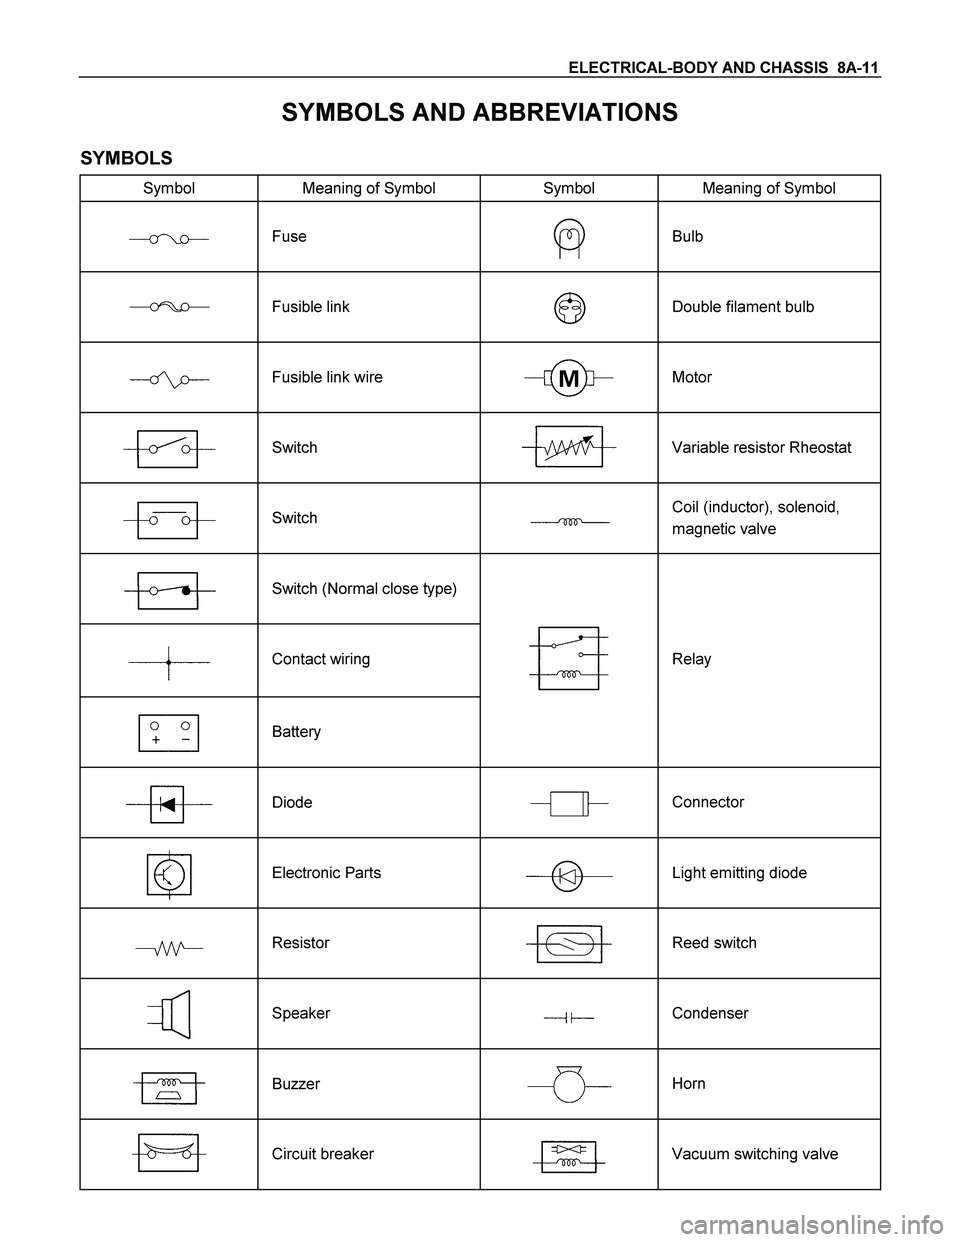 ISUZU TF SERIES 2004  Workshop Manual ELECTRICAL-BODY AND CHASSIS  8A-11 
SYMBOLS AND ABBREVIATIONS 
SYMBOLS 
Symbol  Meaning of Symbol  Symbol  Meaning of Symbol 
 
  
Fuse   
Bulb 
 
 
  
Fusible link   
Double filament bulb 
 
 
  
Fus